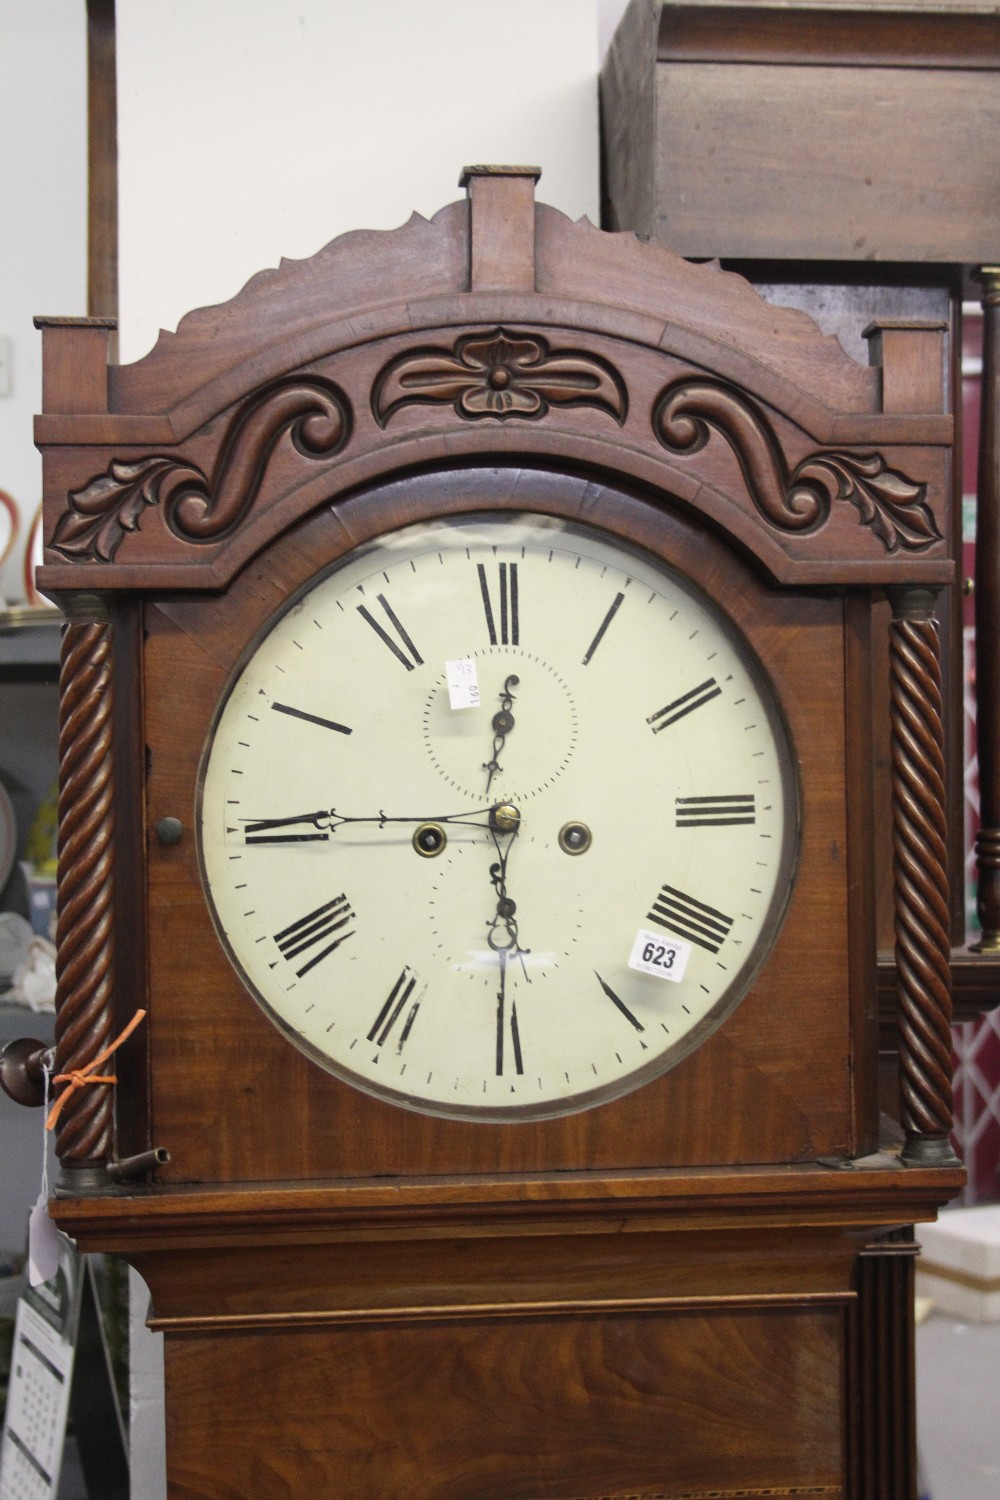 19th cent. Mahogany longcase clock, white dial, black numerals, second hand at 12 and date at 6.